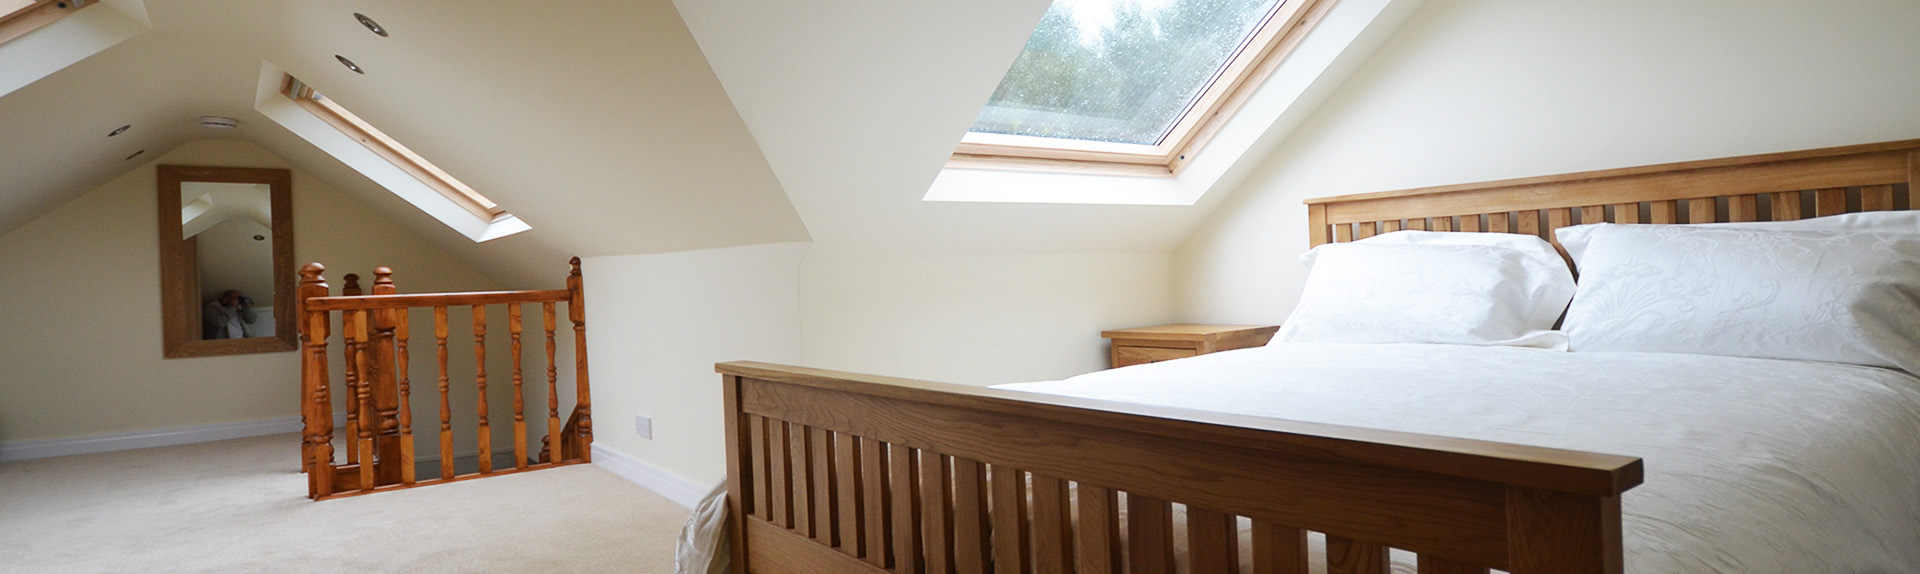 loft-conversions-in-manchester